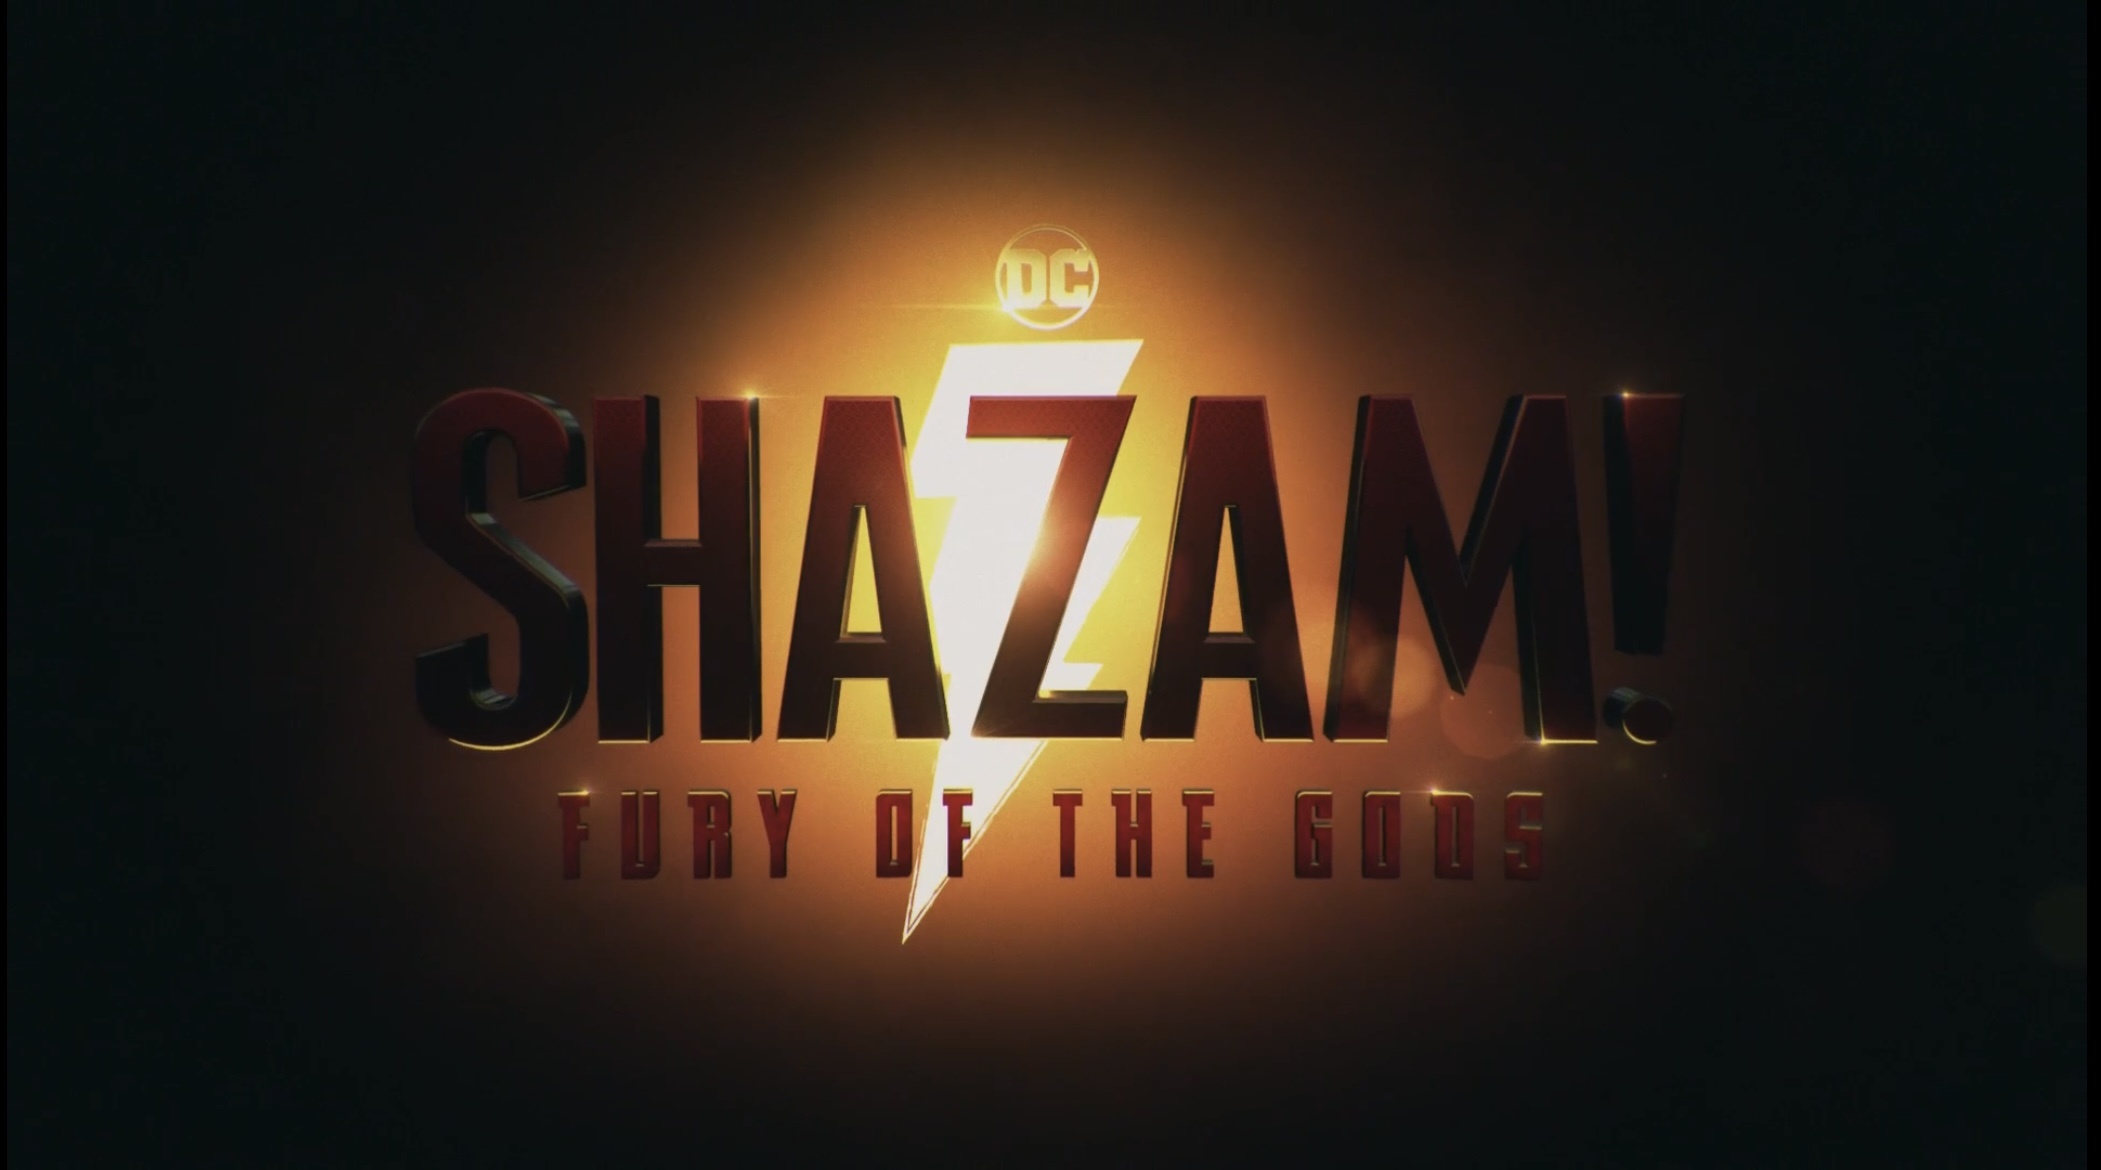 Shazam! Fury of the Gods, Exciting sequel, Superhero wallpapers, Action-packed movie, 2110x1170 HD Desktop